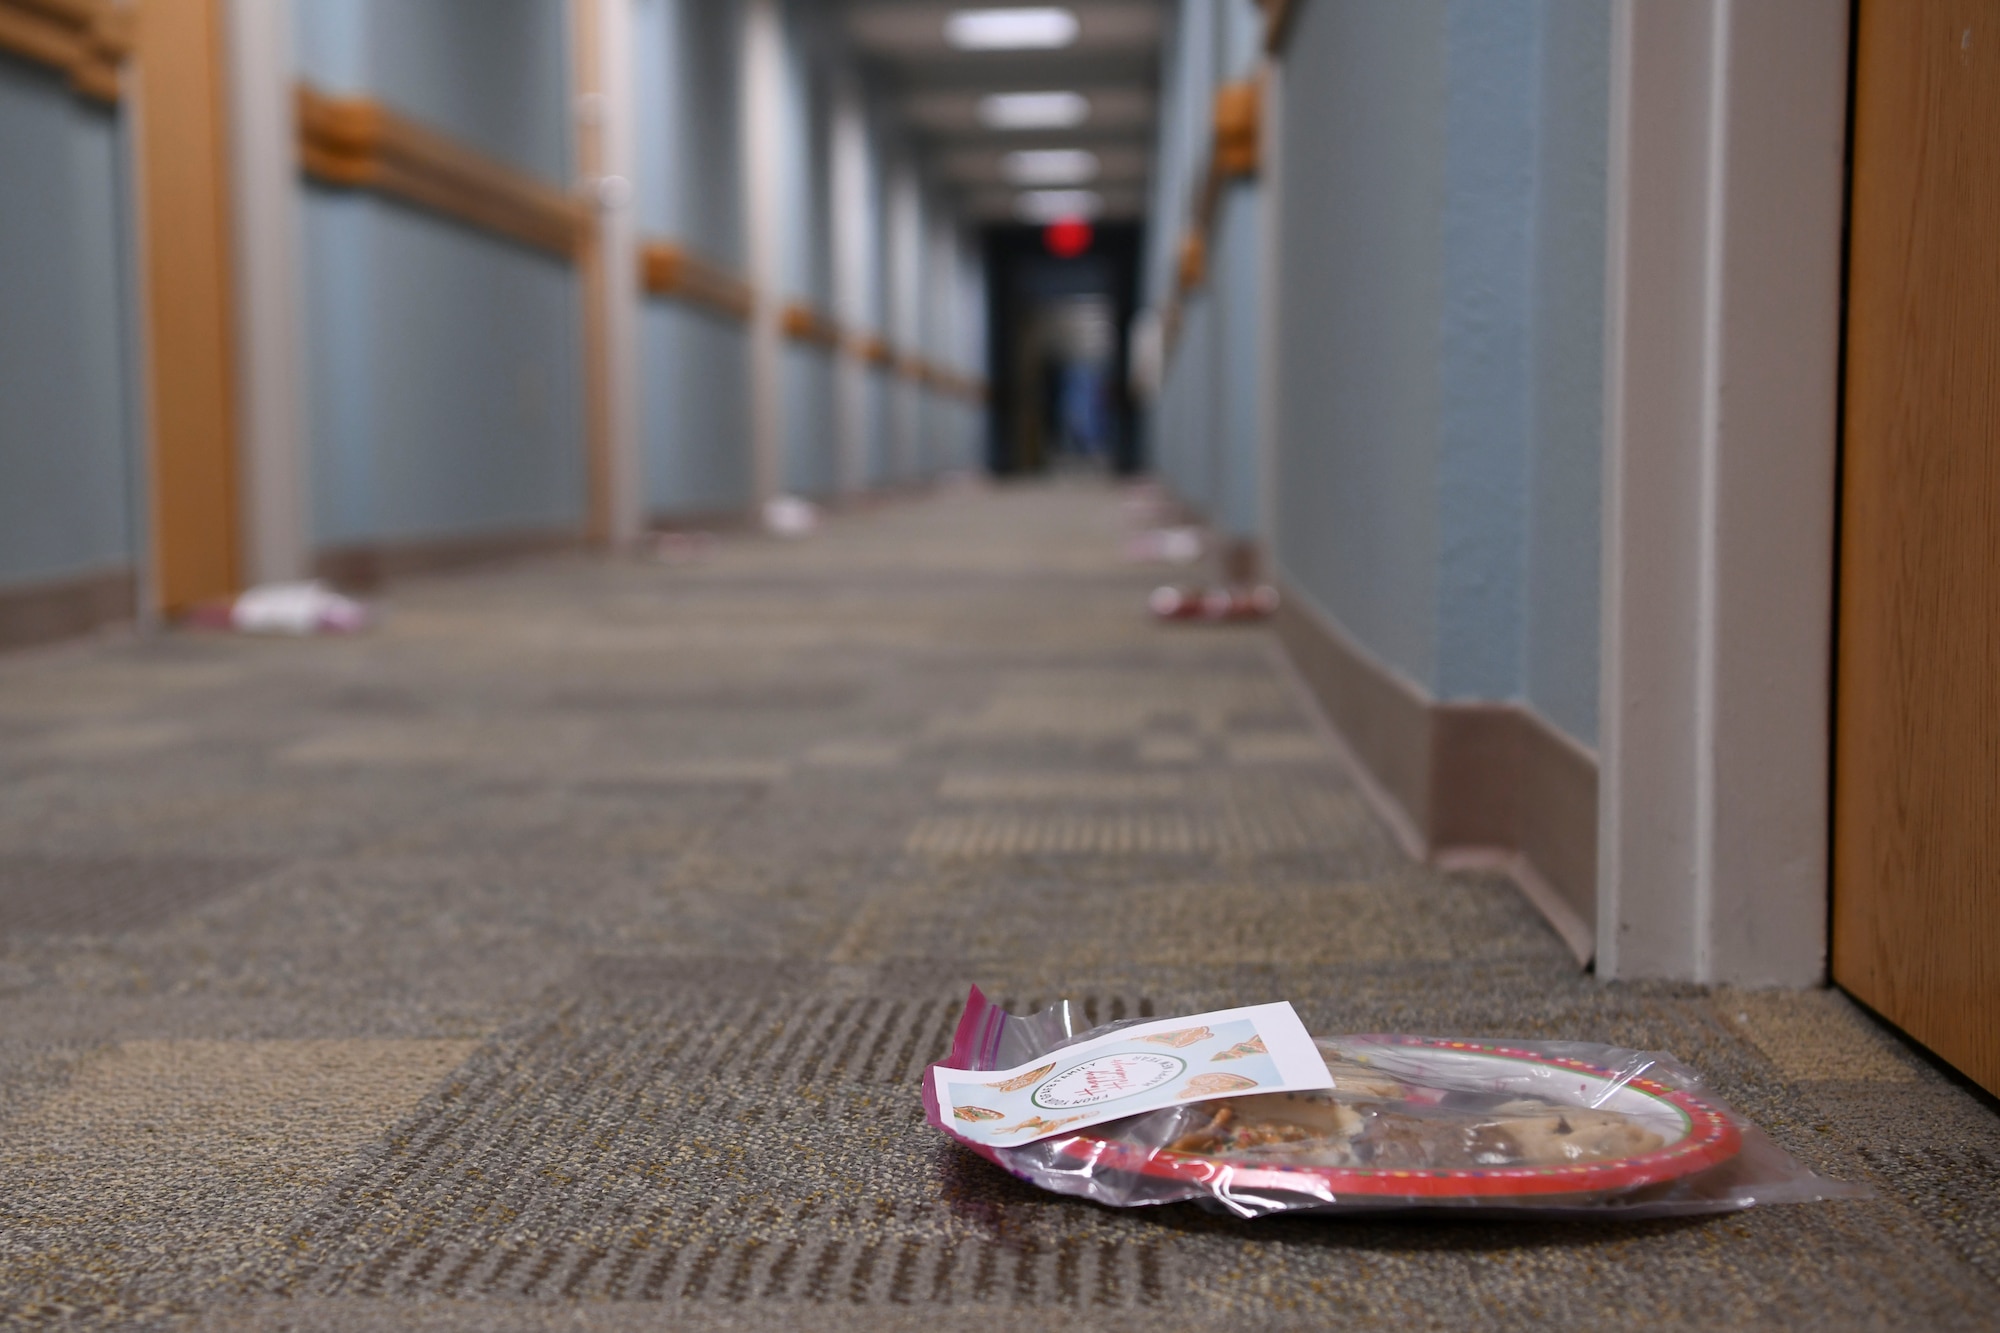 Plates of cookies sit in front of doors all the way down a long hall way.